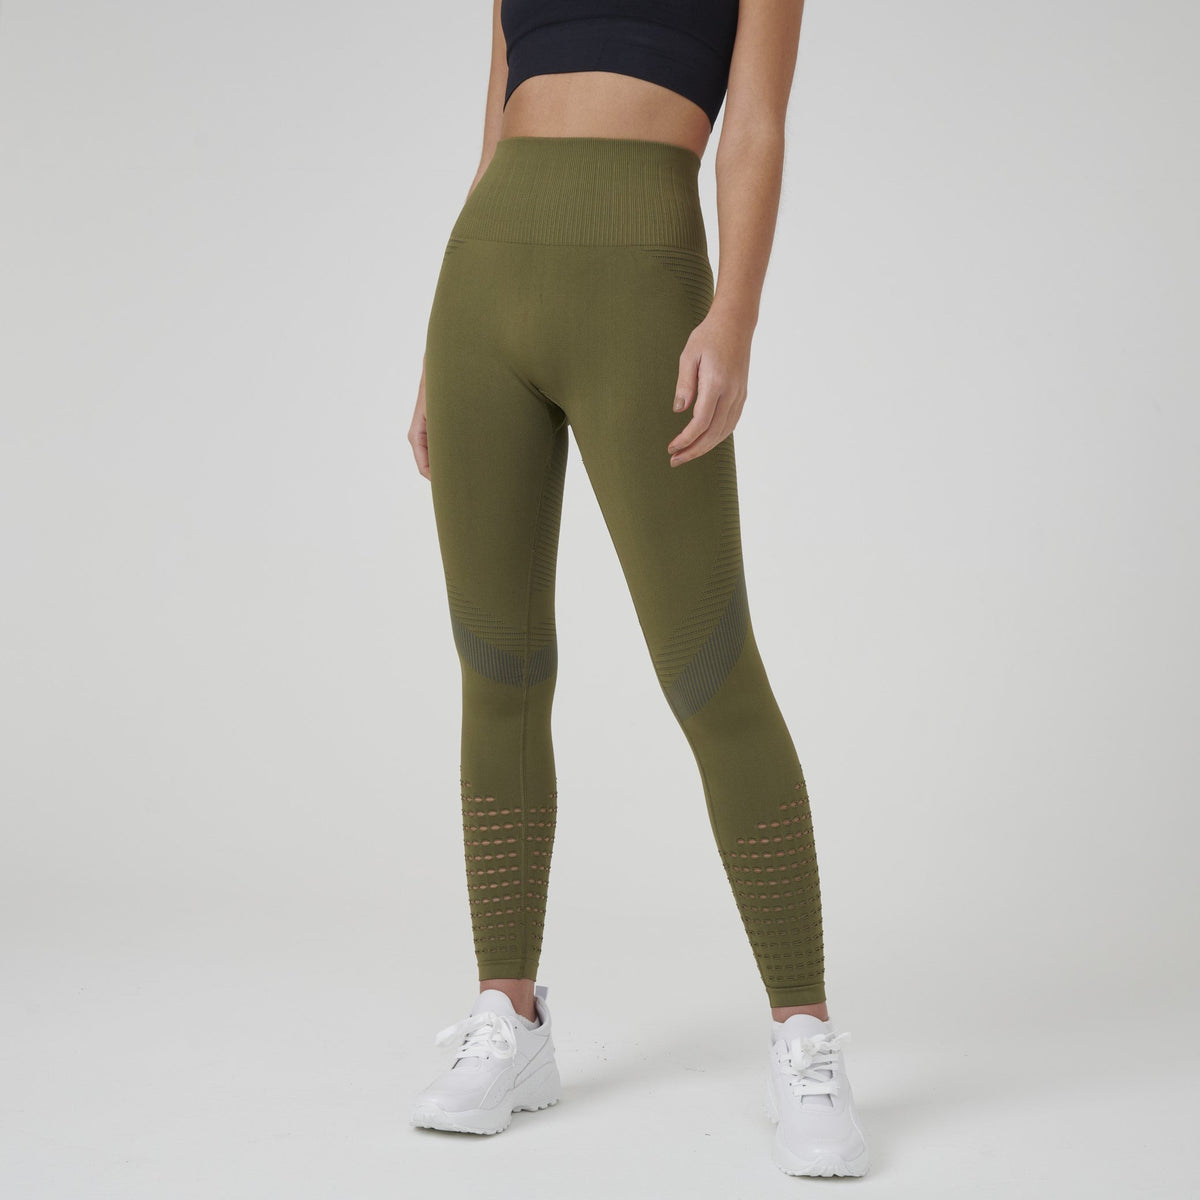 Accent High Waist Leggings by Stylish AF Fitness Co